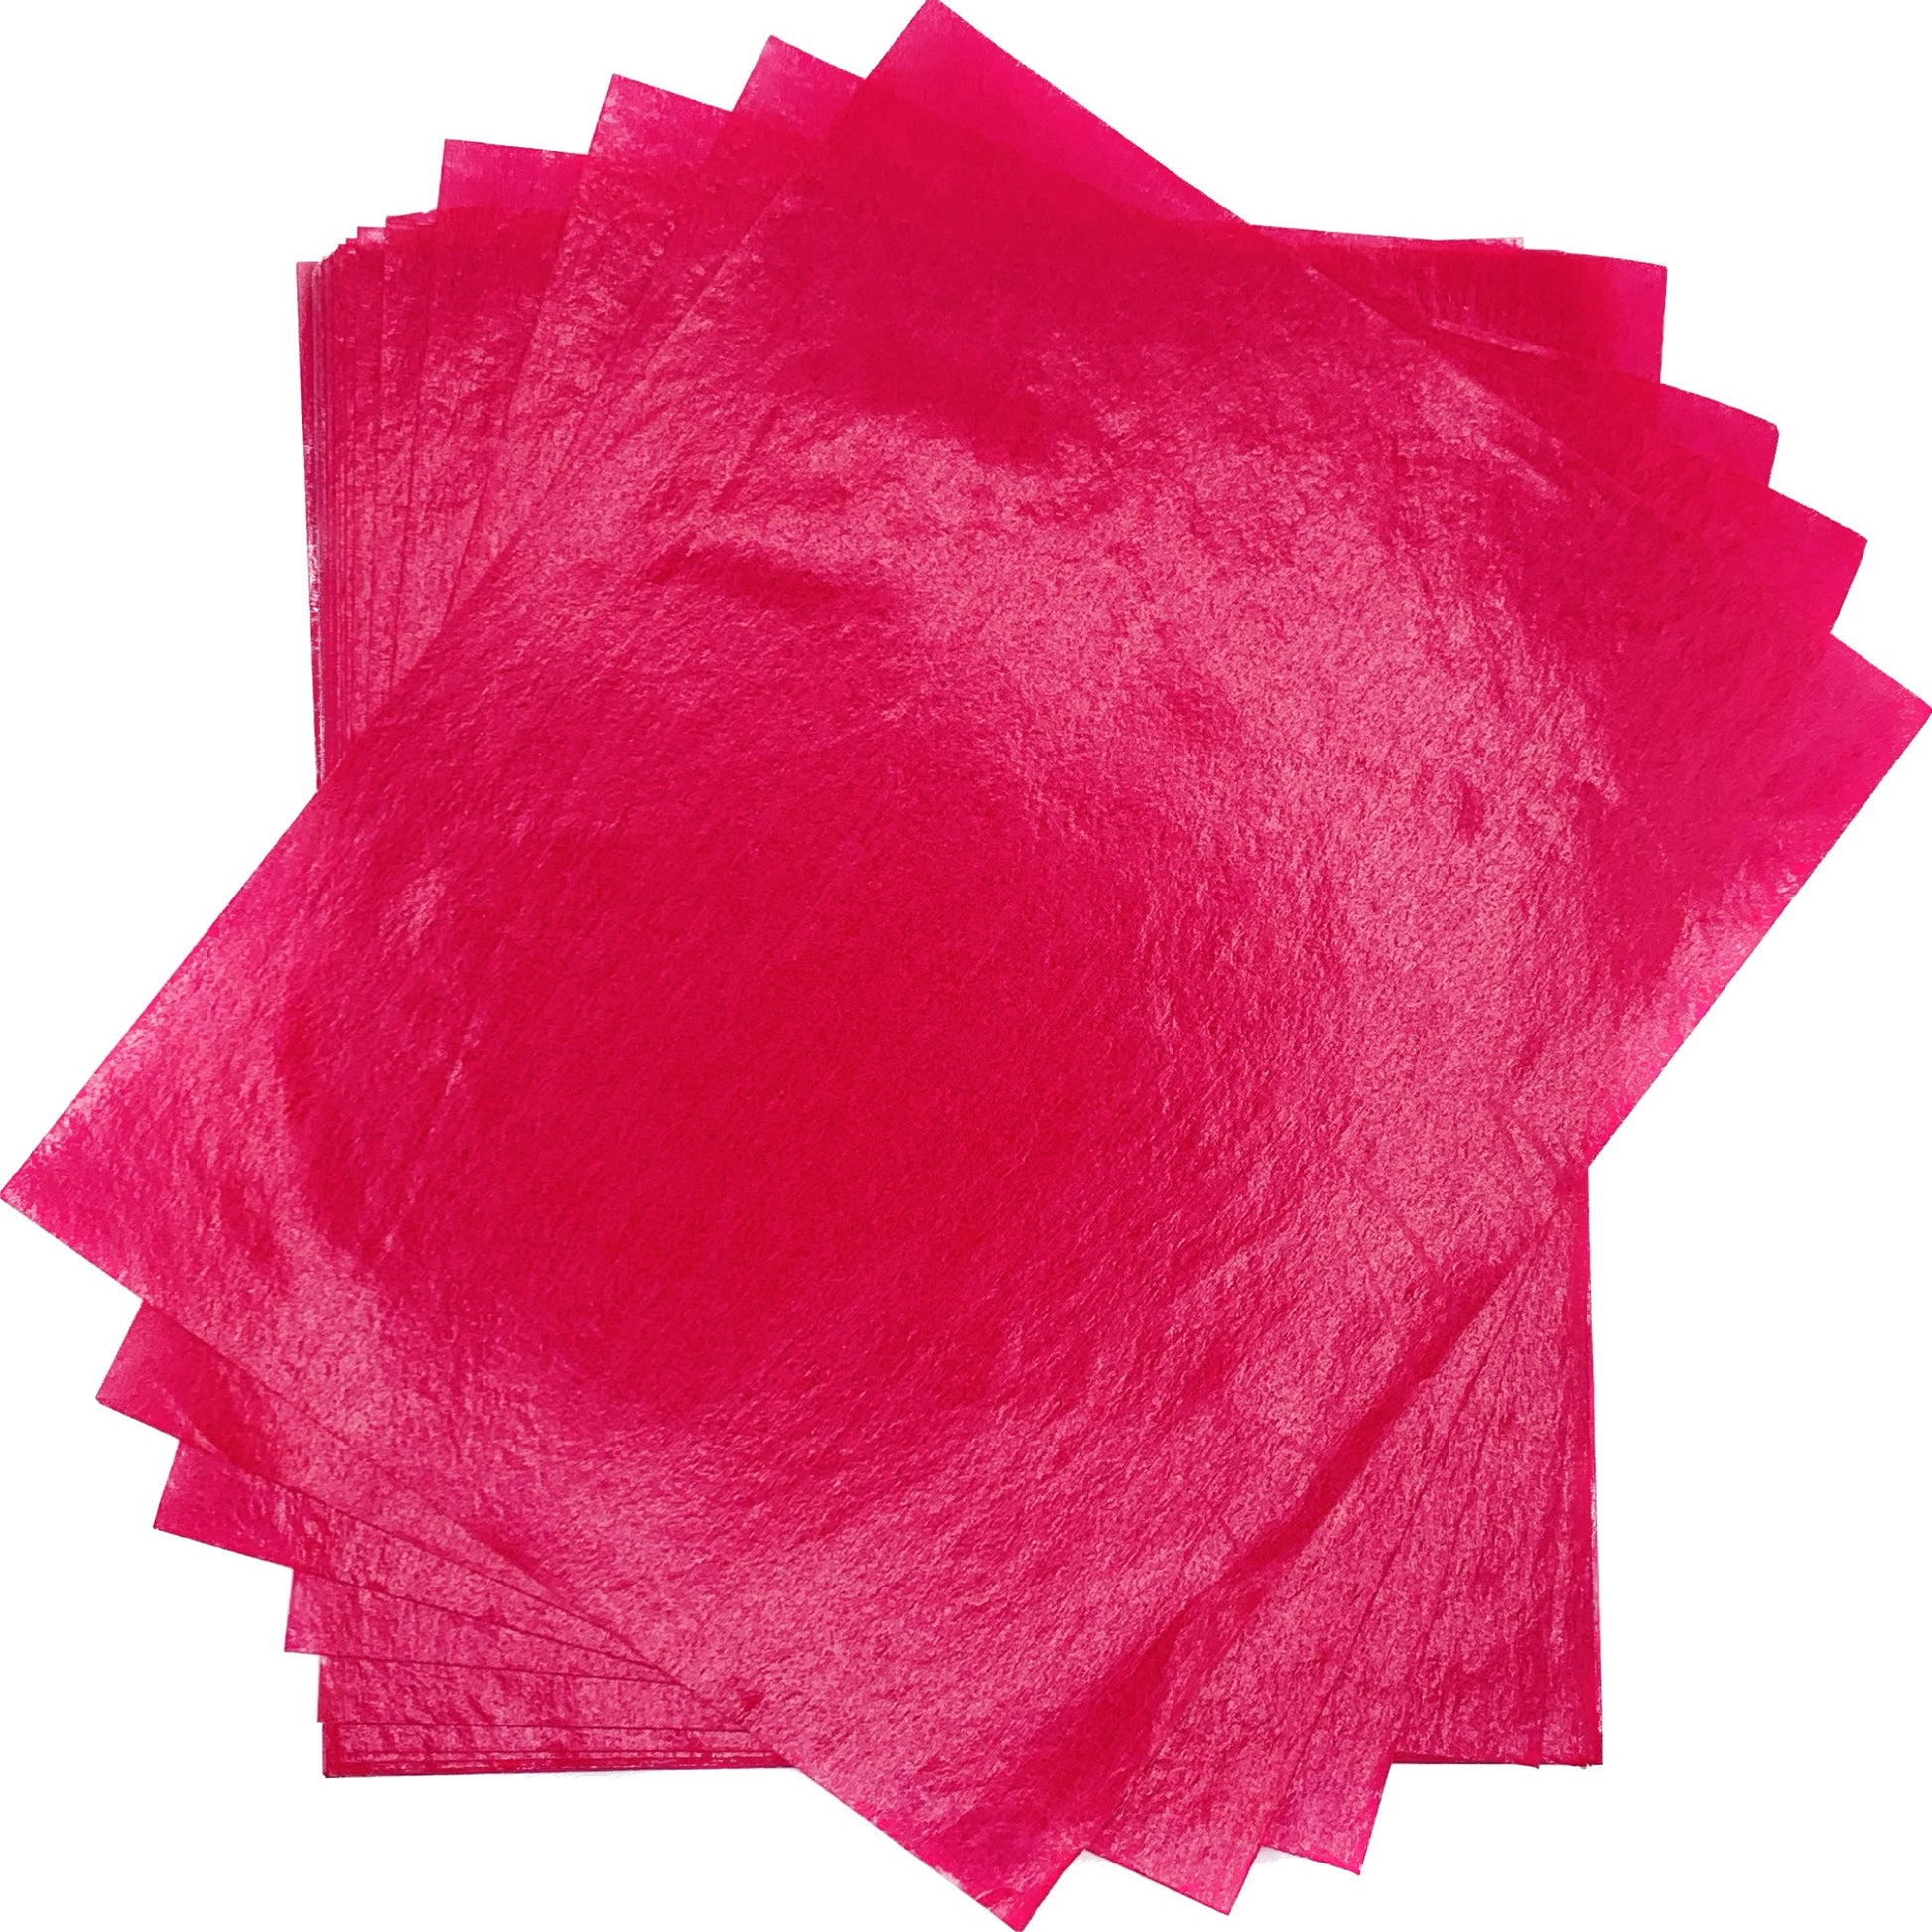 Several Sheets of Pink Caramel Candy Wrappers